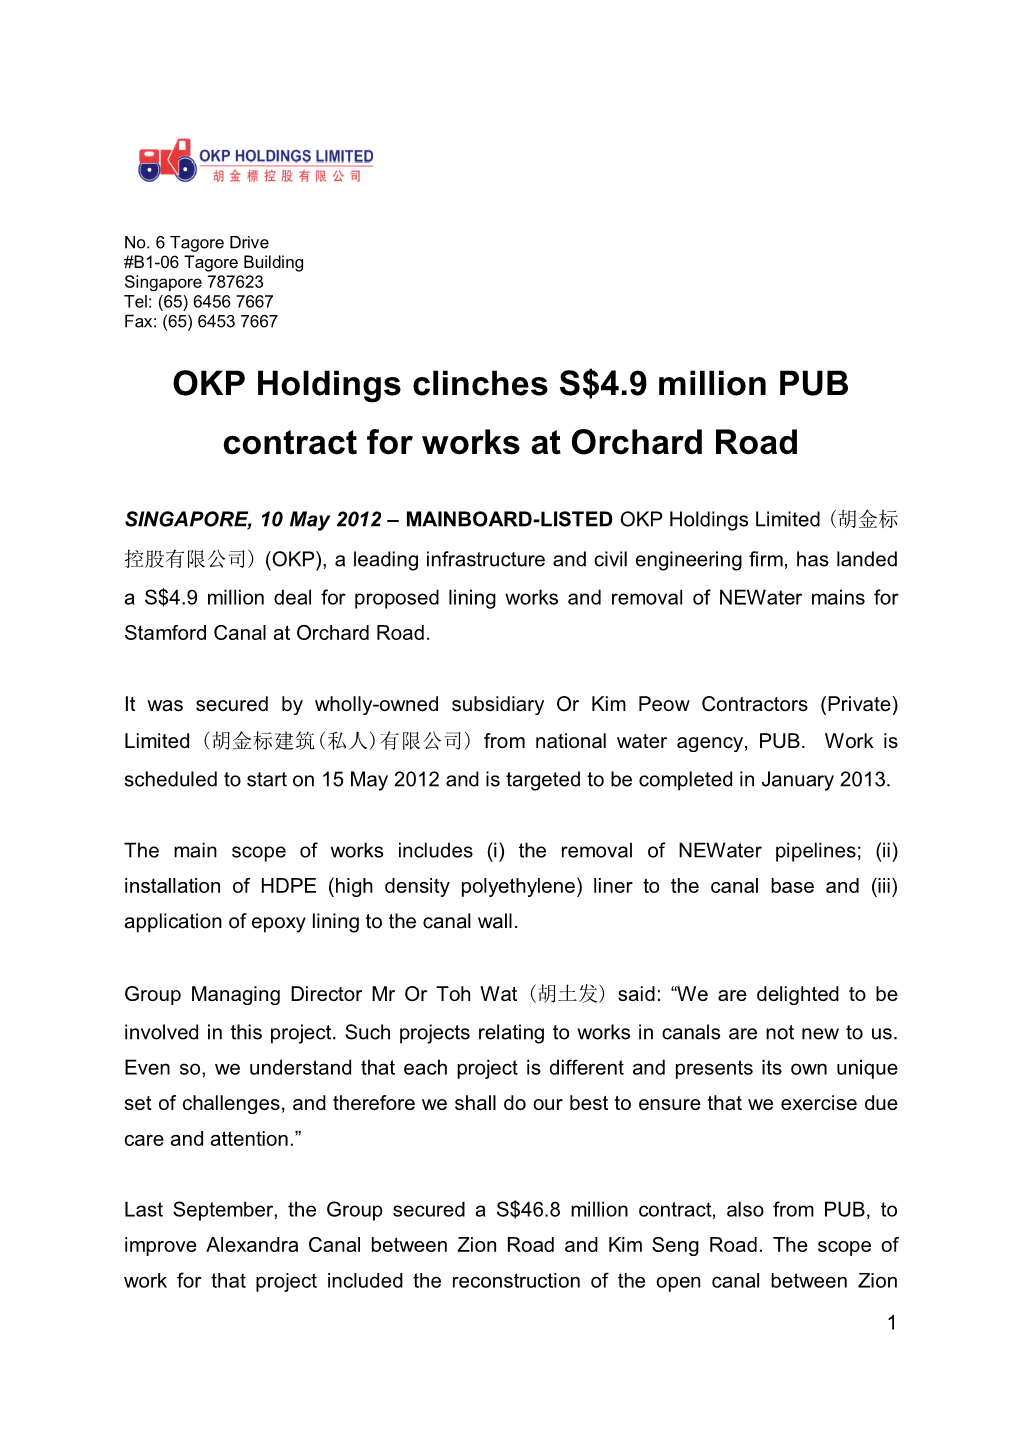 OKP Holdings Clinches S$4.9 Million PUB Contract for Works at Orchard Road